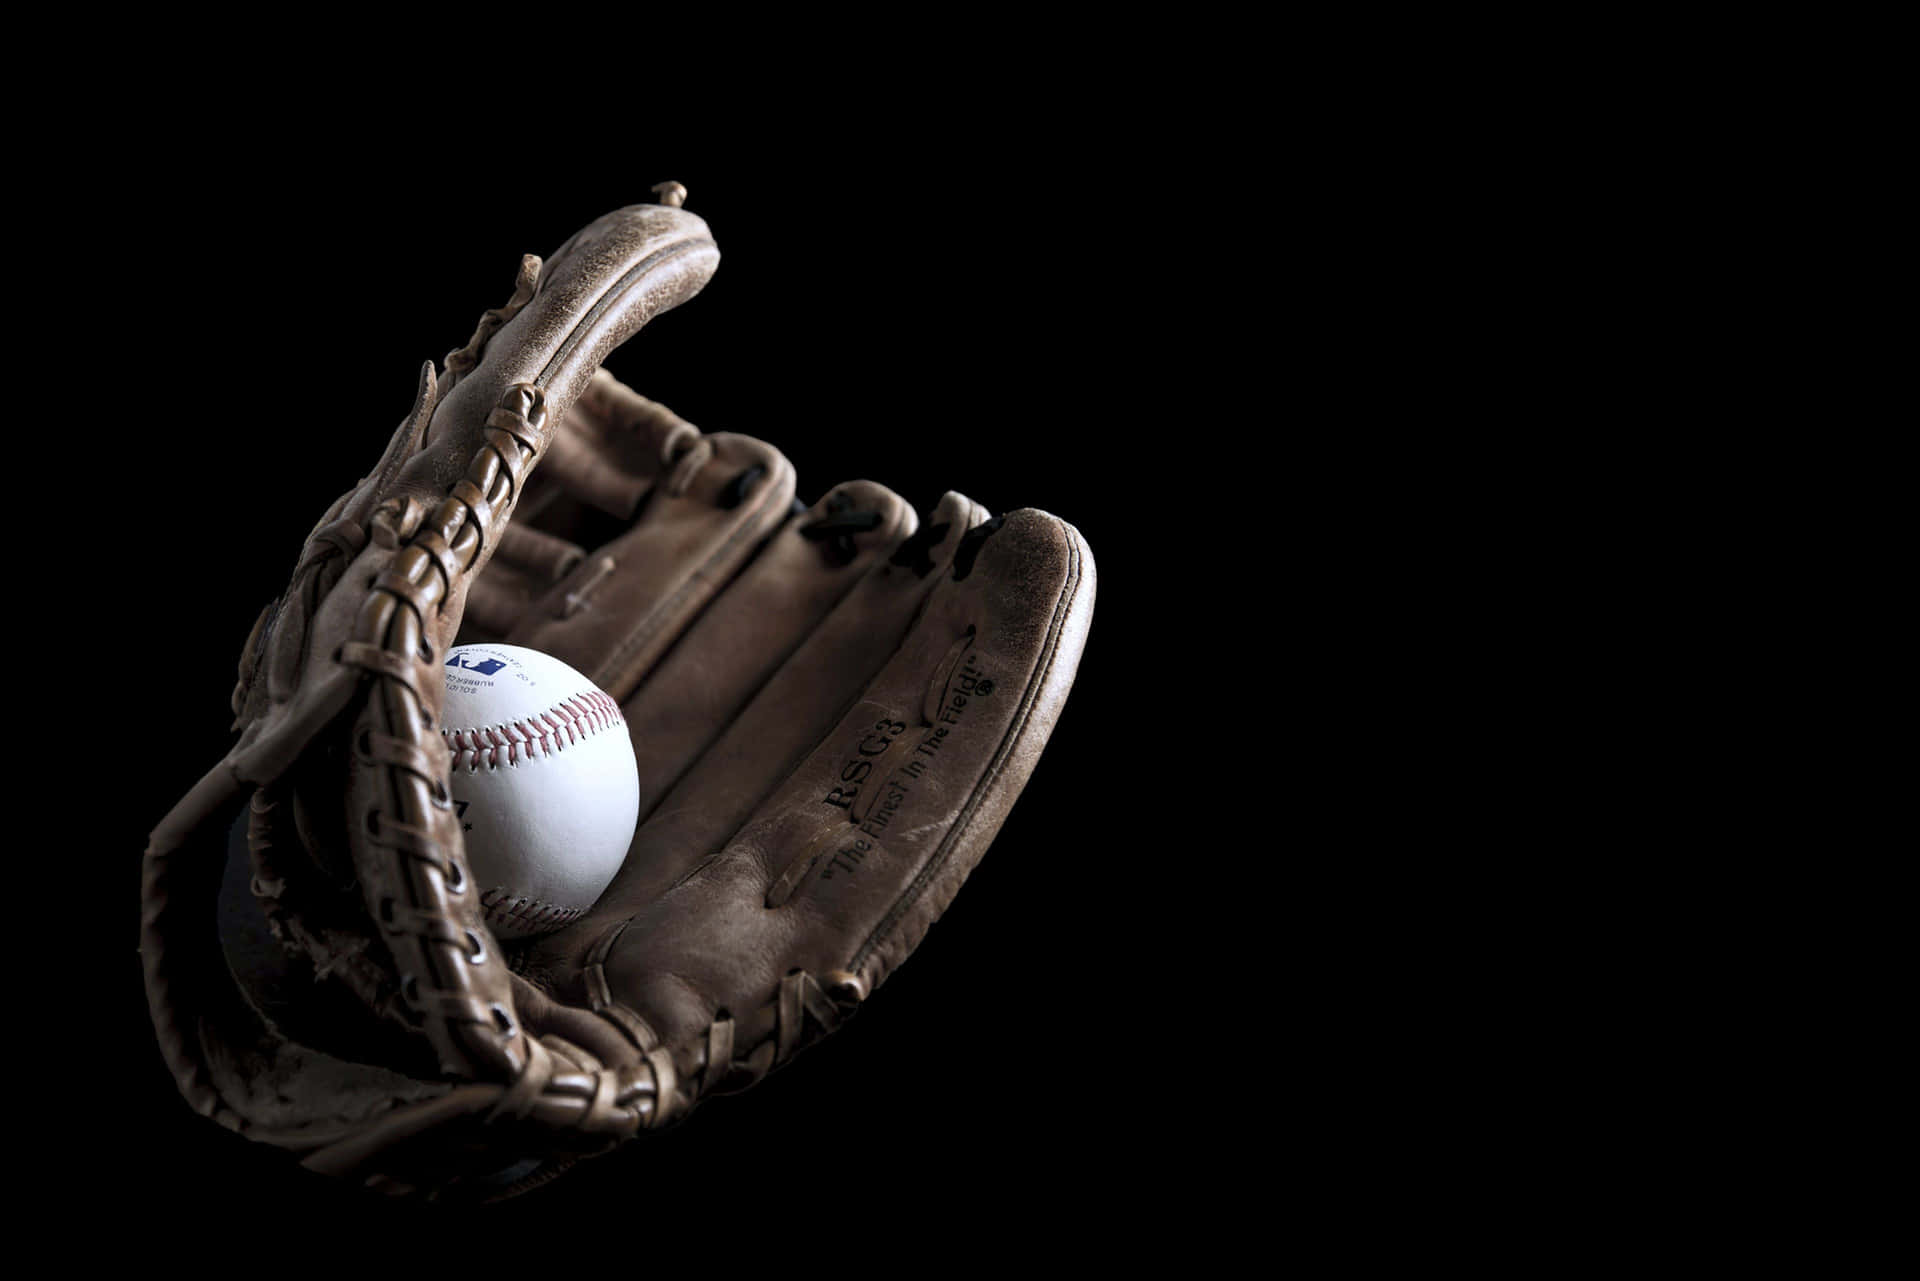 A Close-Up Look of a Baseball Glove Collection Wallpaper